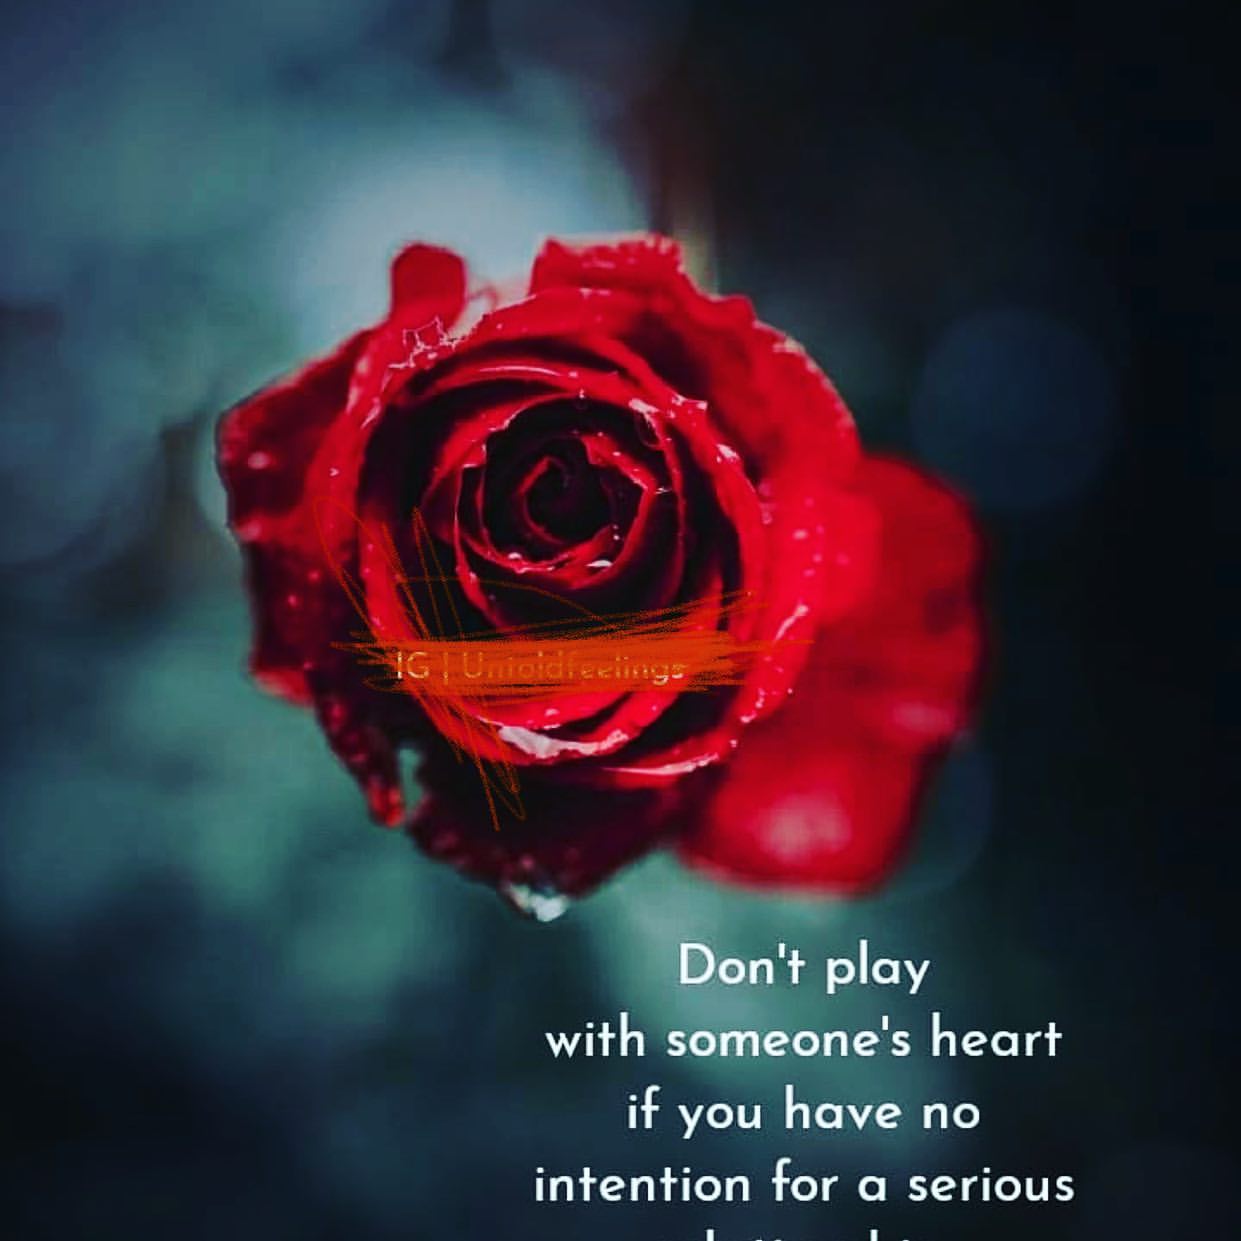 Don't play with someone's heart if you have no intention for a serious.